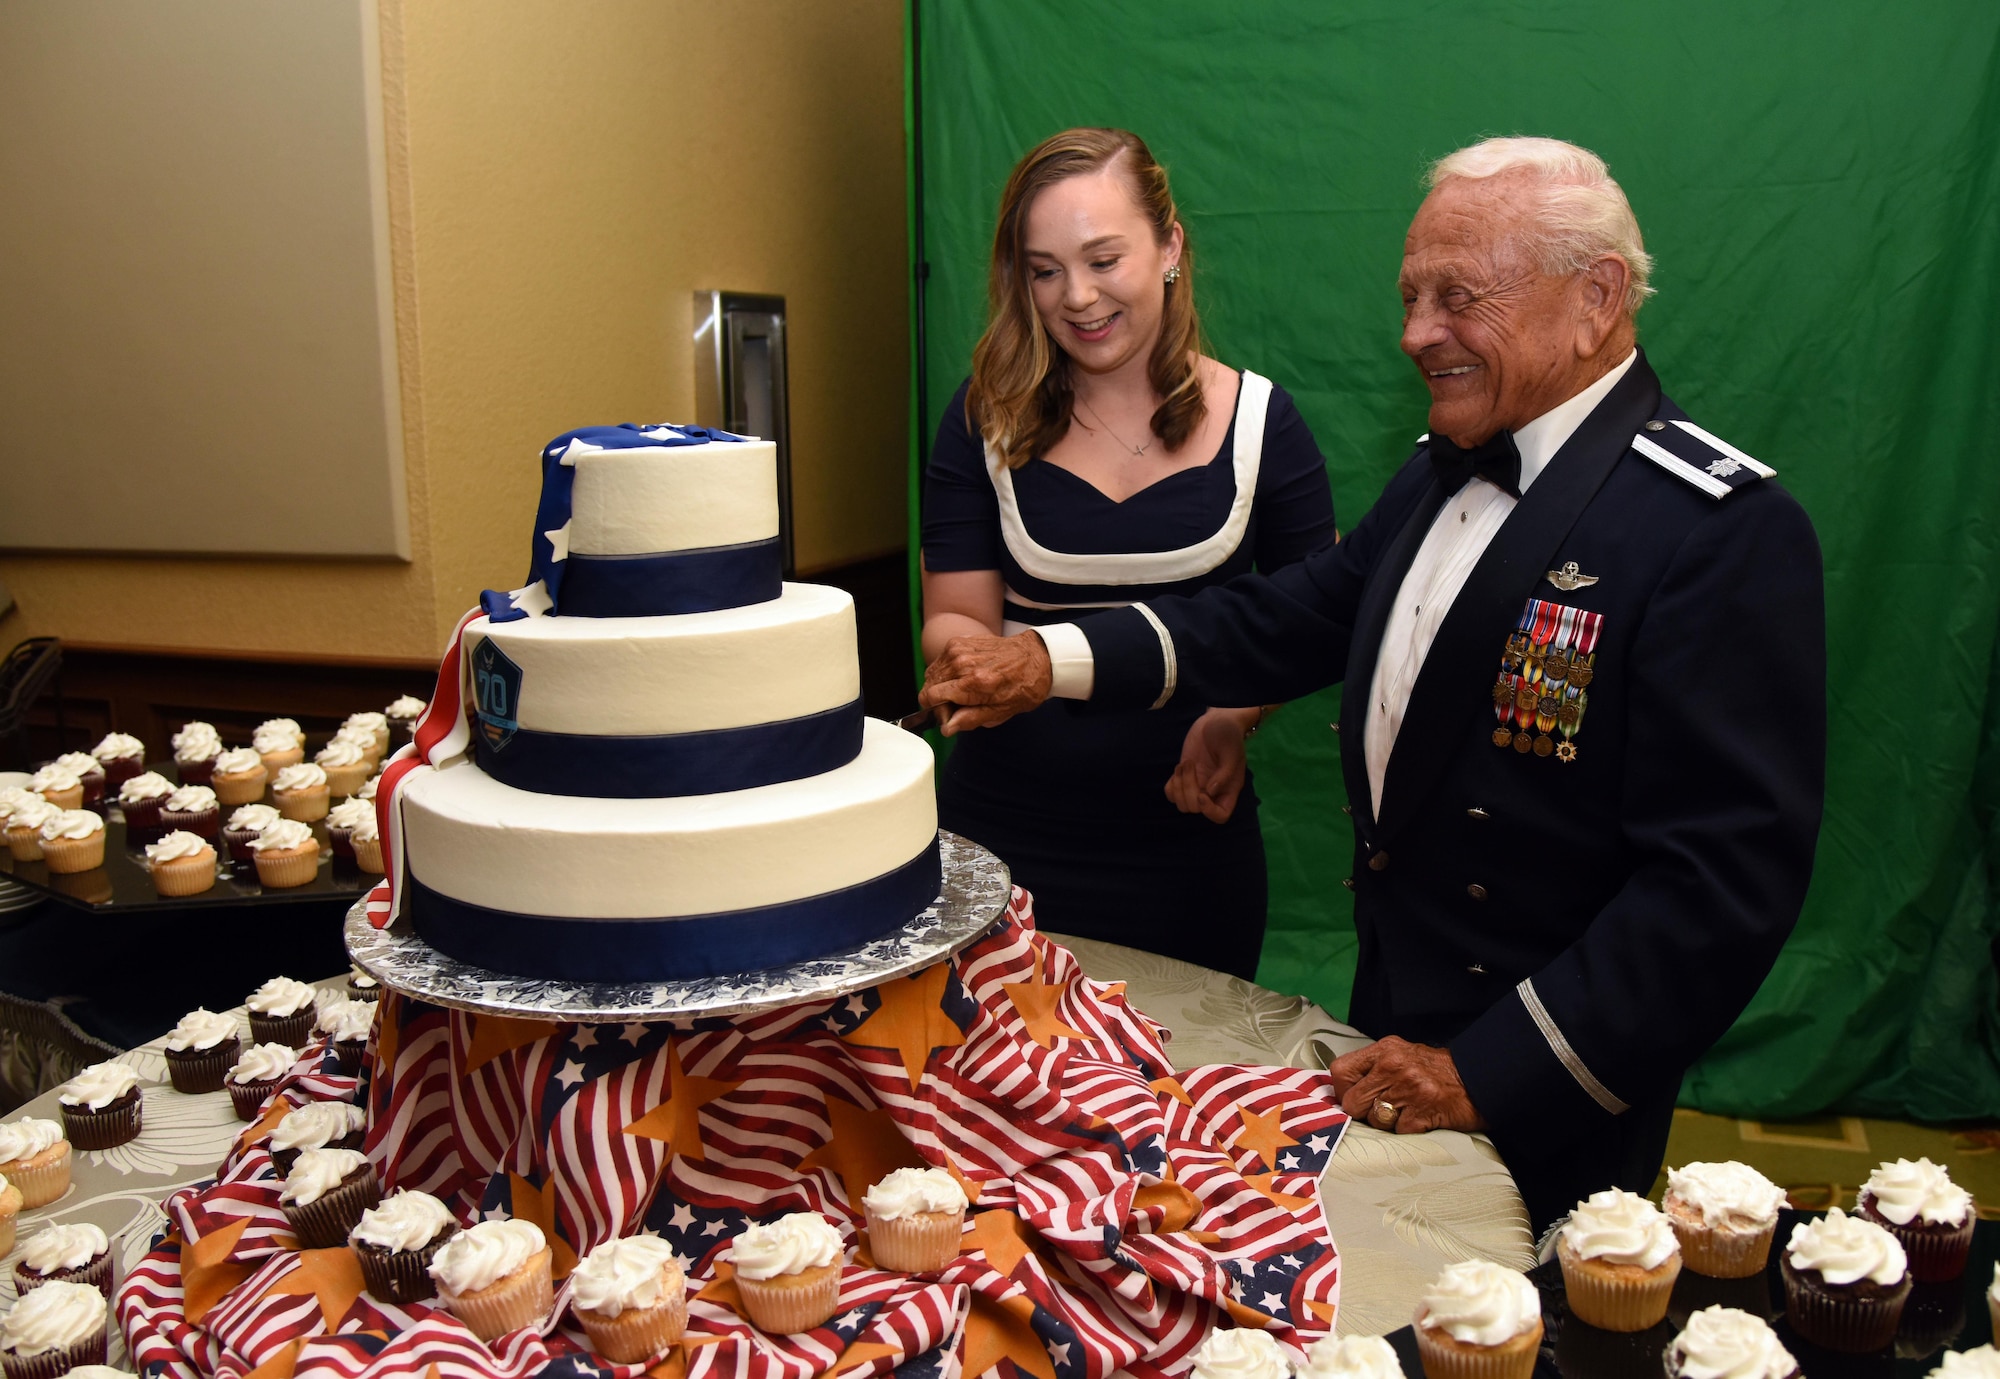 Airman Jacquelyn Gucciardi, 81st Medical Operations Squadron medical technician, and Retired Lt. Col. Dick Wilson, participate in a cake cutting ceremony during the U.S. Air Force 70th Birthday Ball at the Bay Breeze Event Center Sept. 16, 2017, on Keesler Air Force Base, Mississippi. The event, hosted by the 81st Training Wing and the John C. Stennis Chapter of the Air Force Association, also paid tribute to all prisoners of war and military members still missing in action. (U.S. Air Force photo by Kemberly Groue)